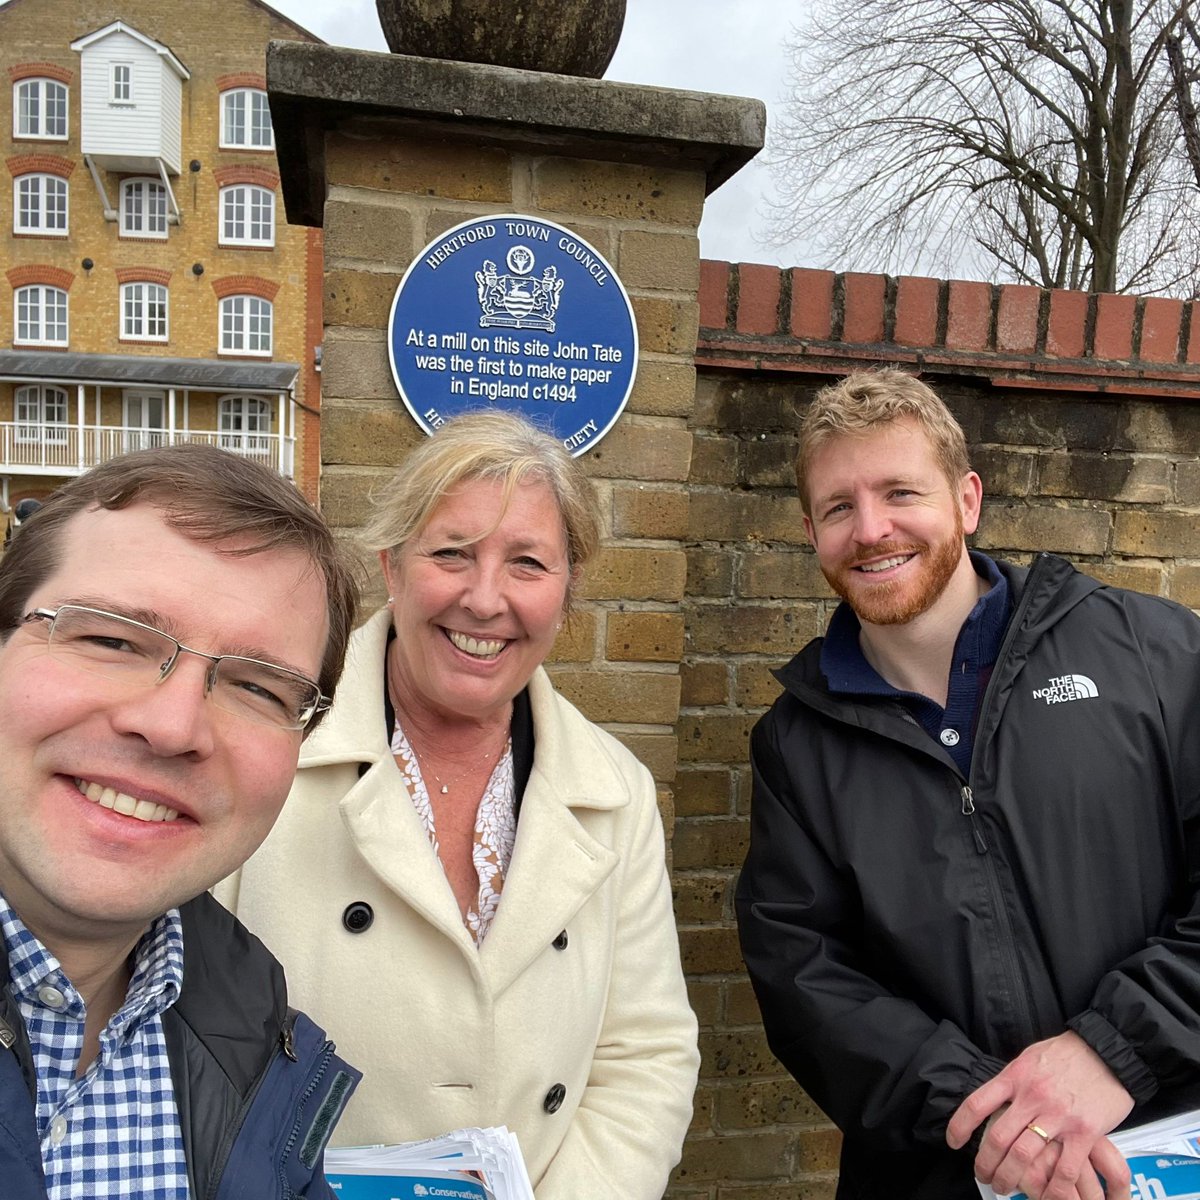 Another weekend out and about in Sawbridgeworth and Hertford chatting to residents with our fantastic local councillors, candidates and activists. 💙 @HertStortford